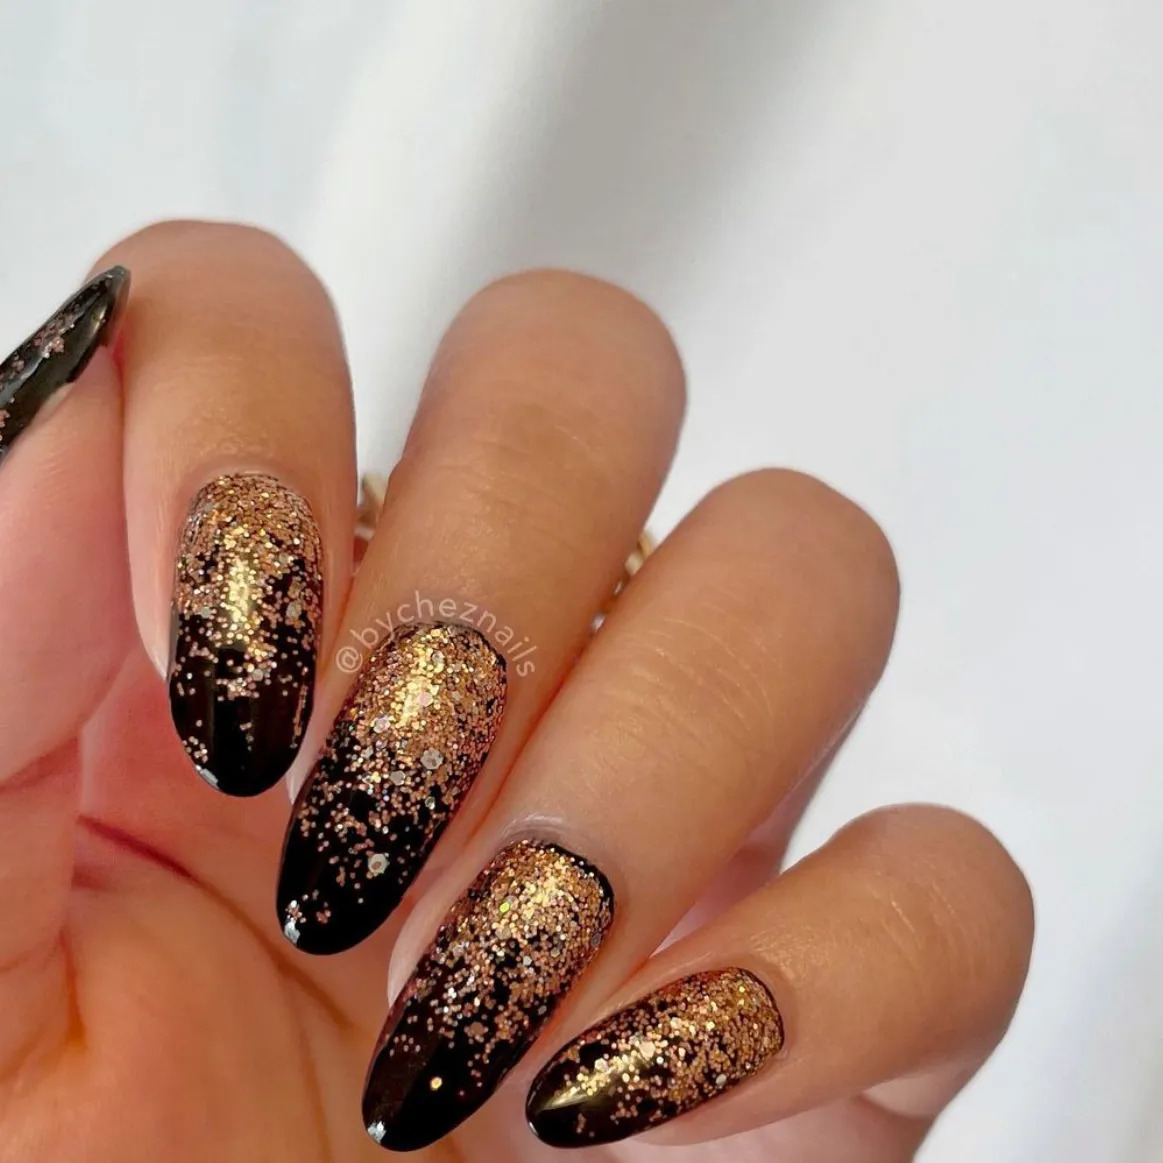 Black And And Glittered New Year's Eve Nails